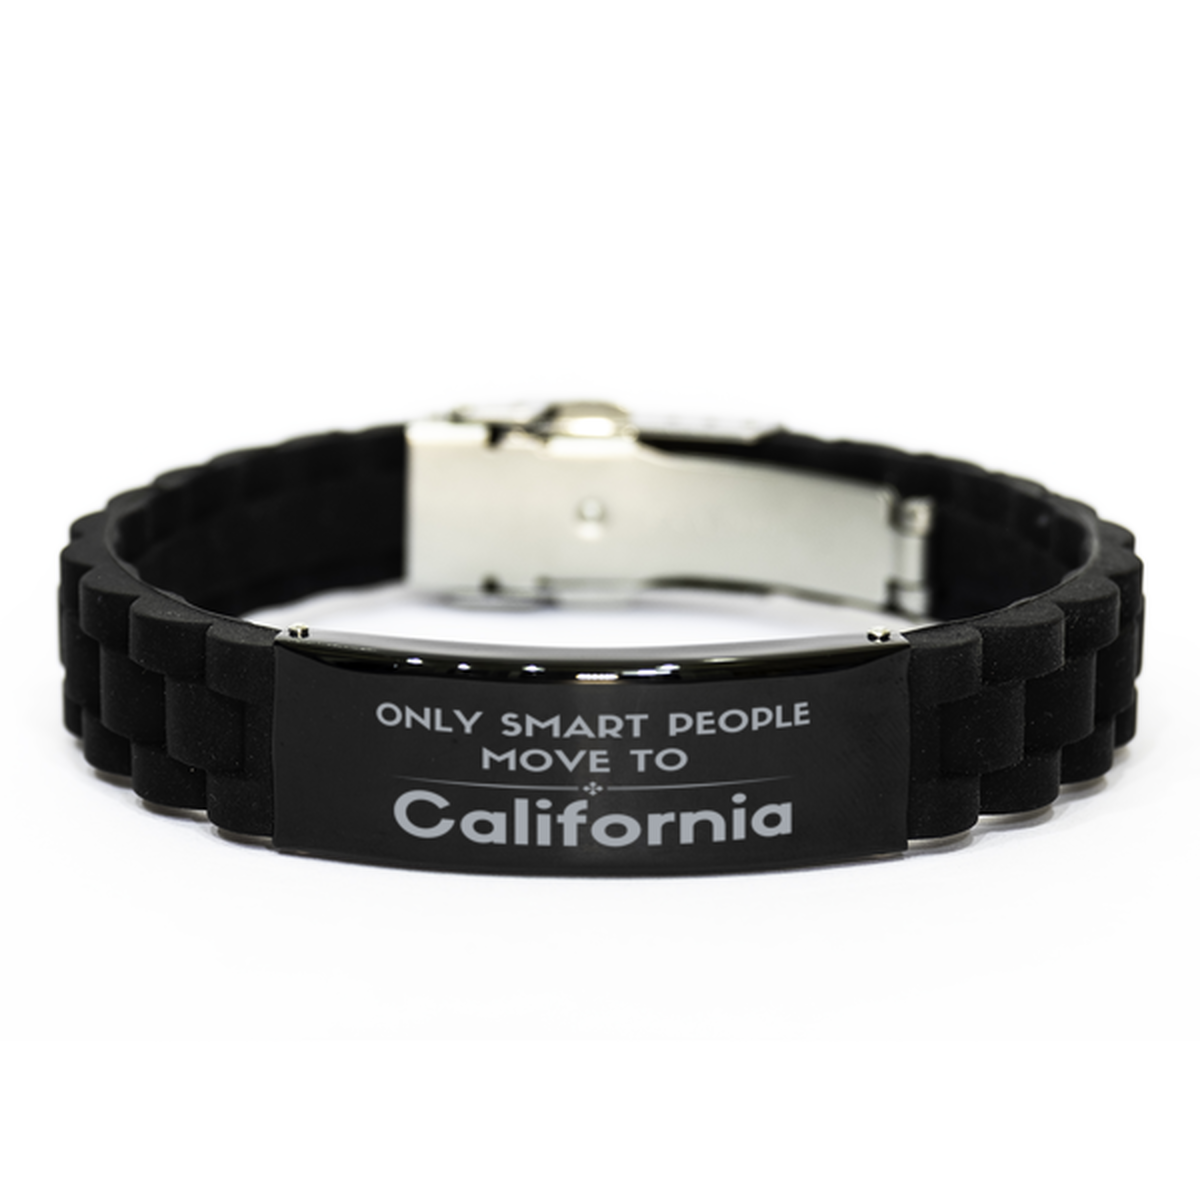 Only smart people move to California Black Glidelock Clasp Bracelet, Gag Gifts For California, Move to California Gifts for Friends Coworker Funny Saying Quote